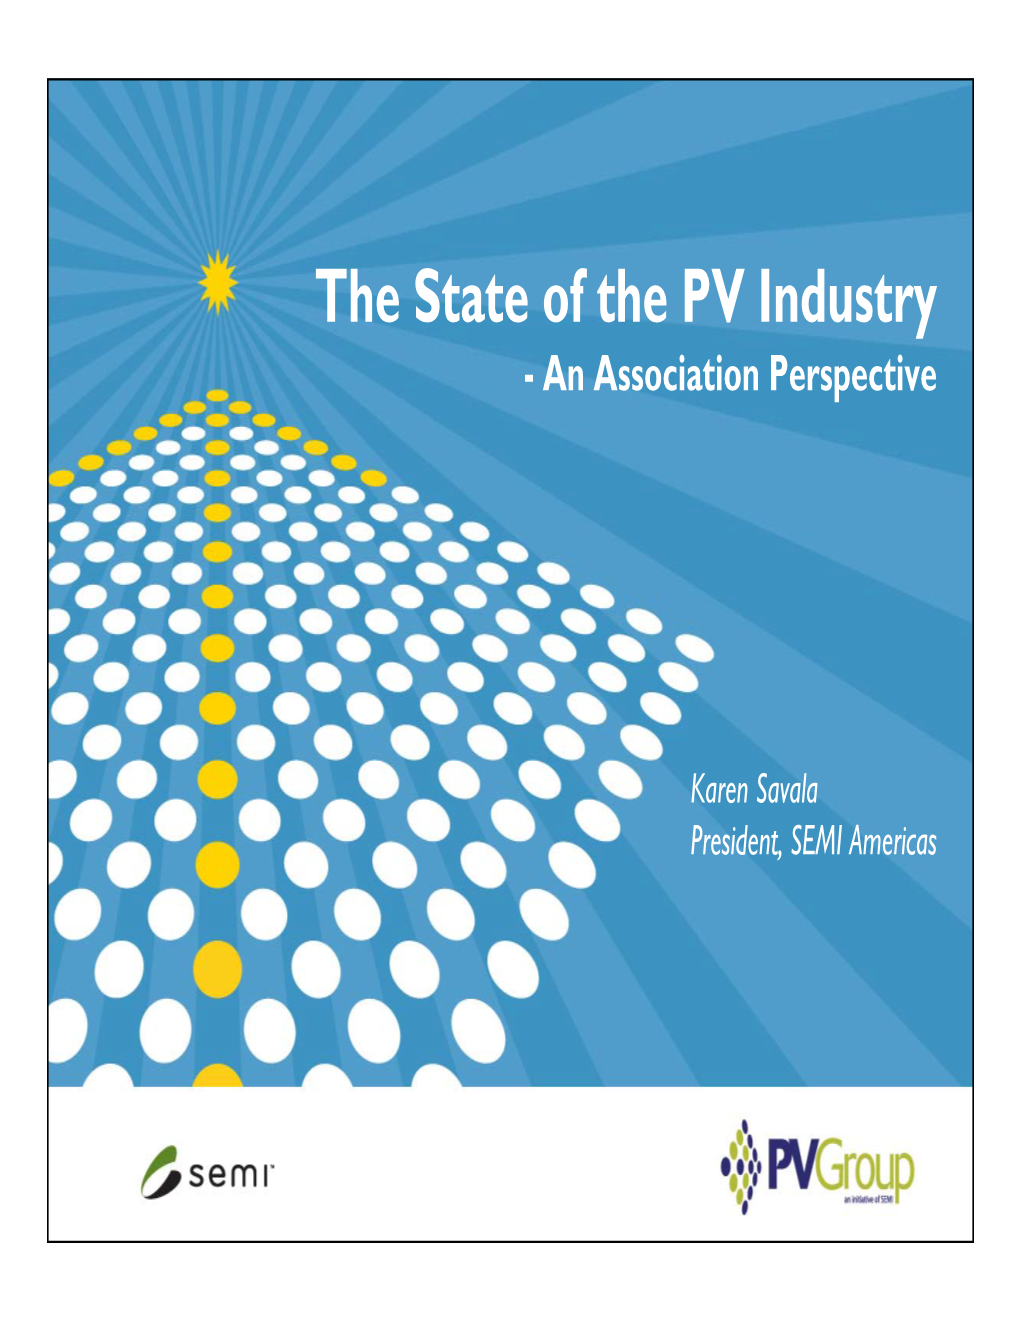 The State of the PV Industry - an Association Perspective